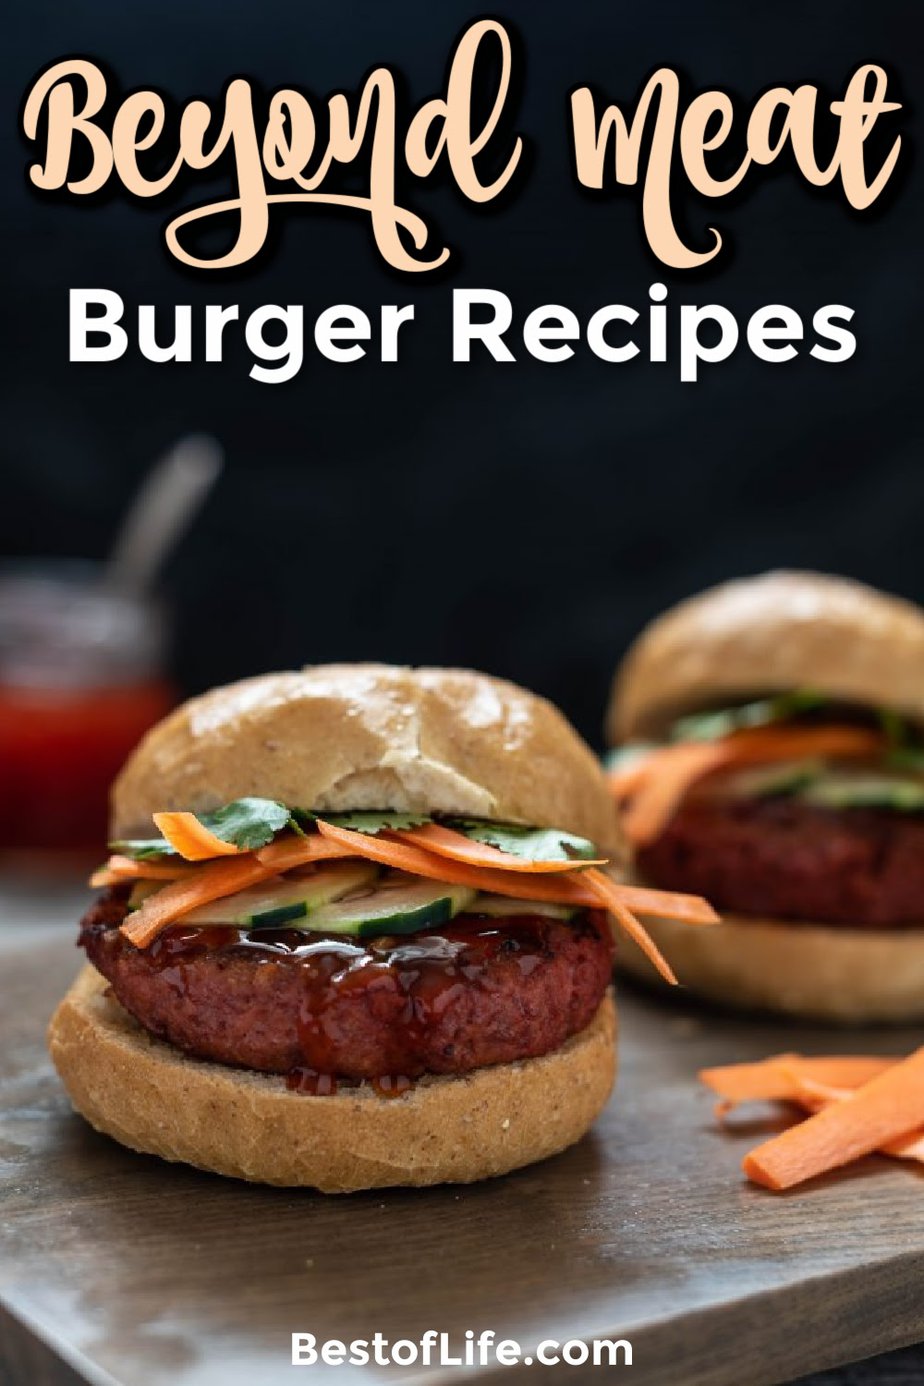 Beyond Meat Burger Recipes | Plant Based Burger Recipes : The Best of Life